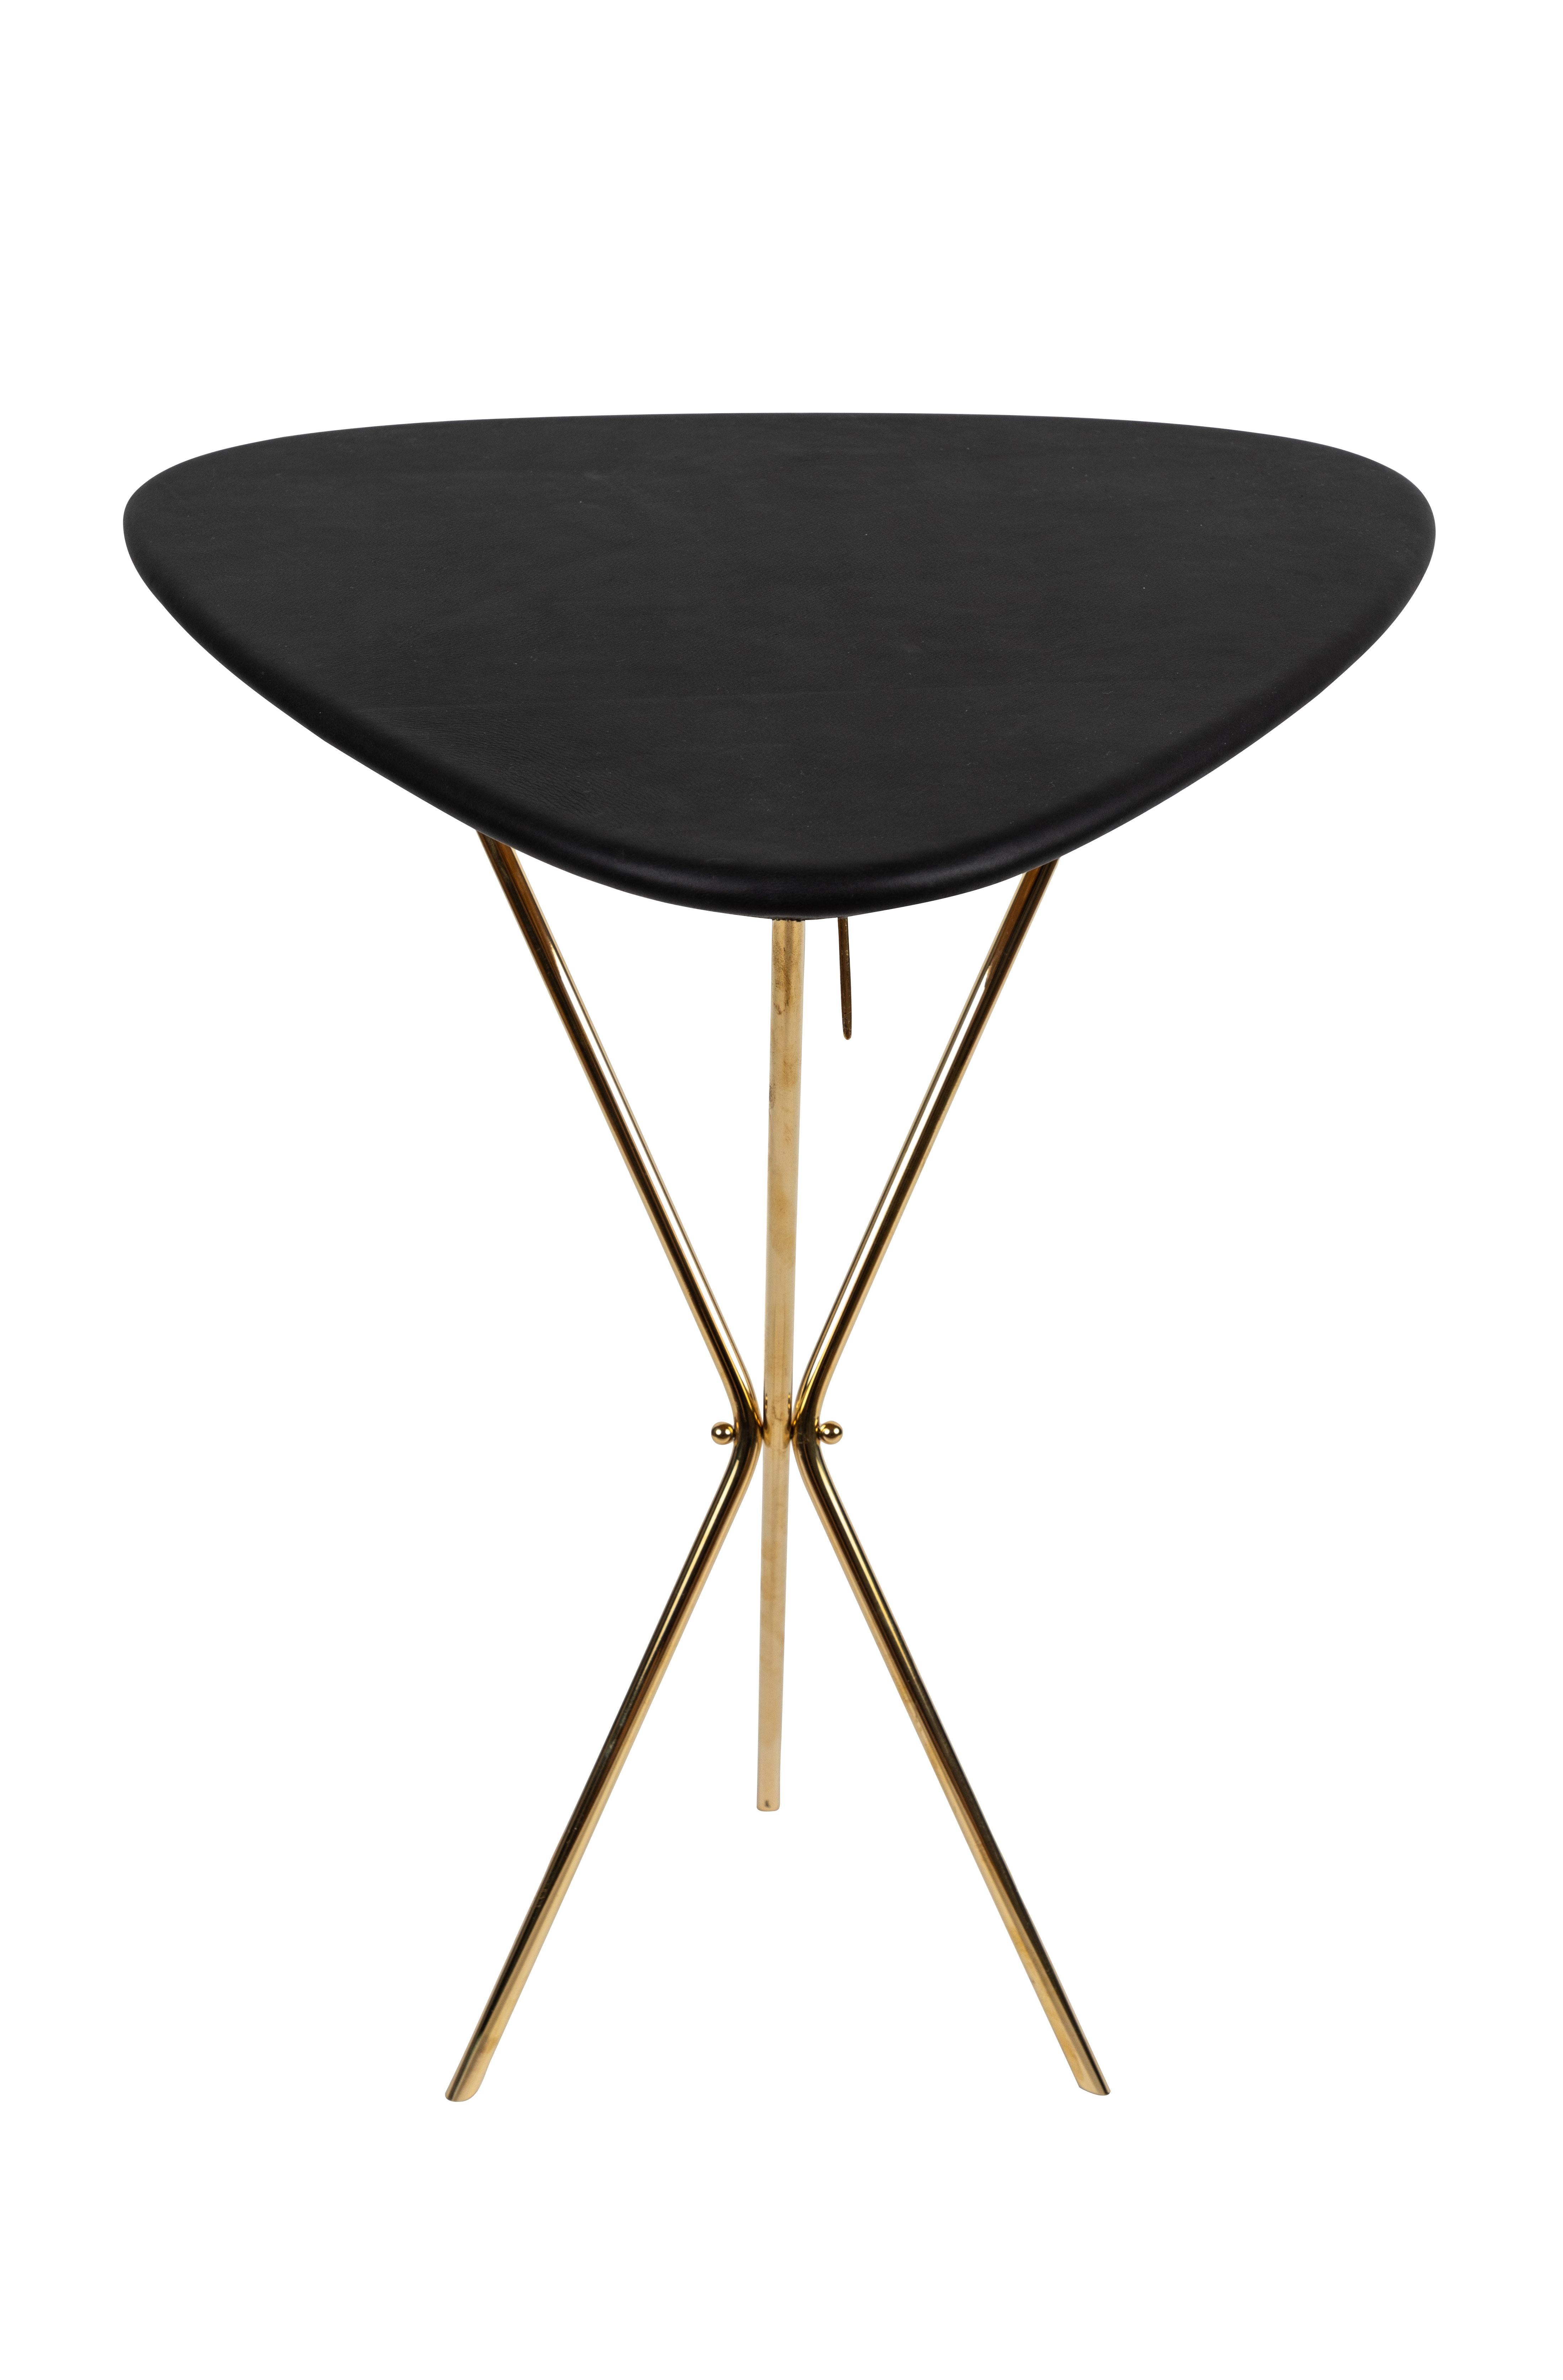 Carl Auböck model #3642 brass and leather table designed in the 1950s, this incredibly refined and sculptural table is executed in beautifully grained oak, polished brass and hand upholstered leather. Inspired by the folding map tables carried by